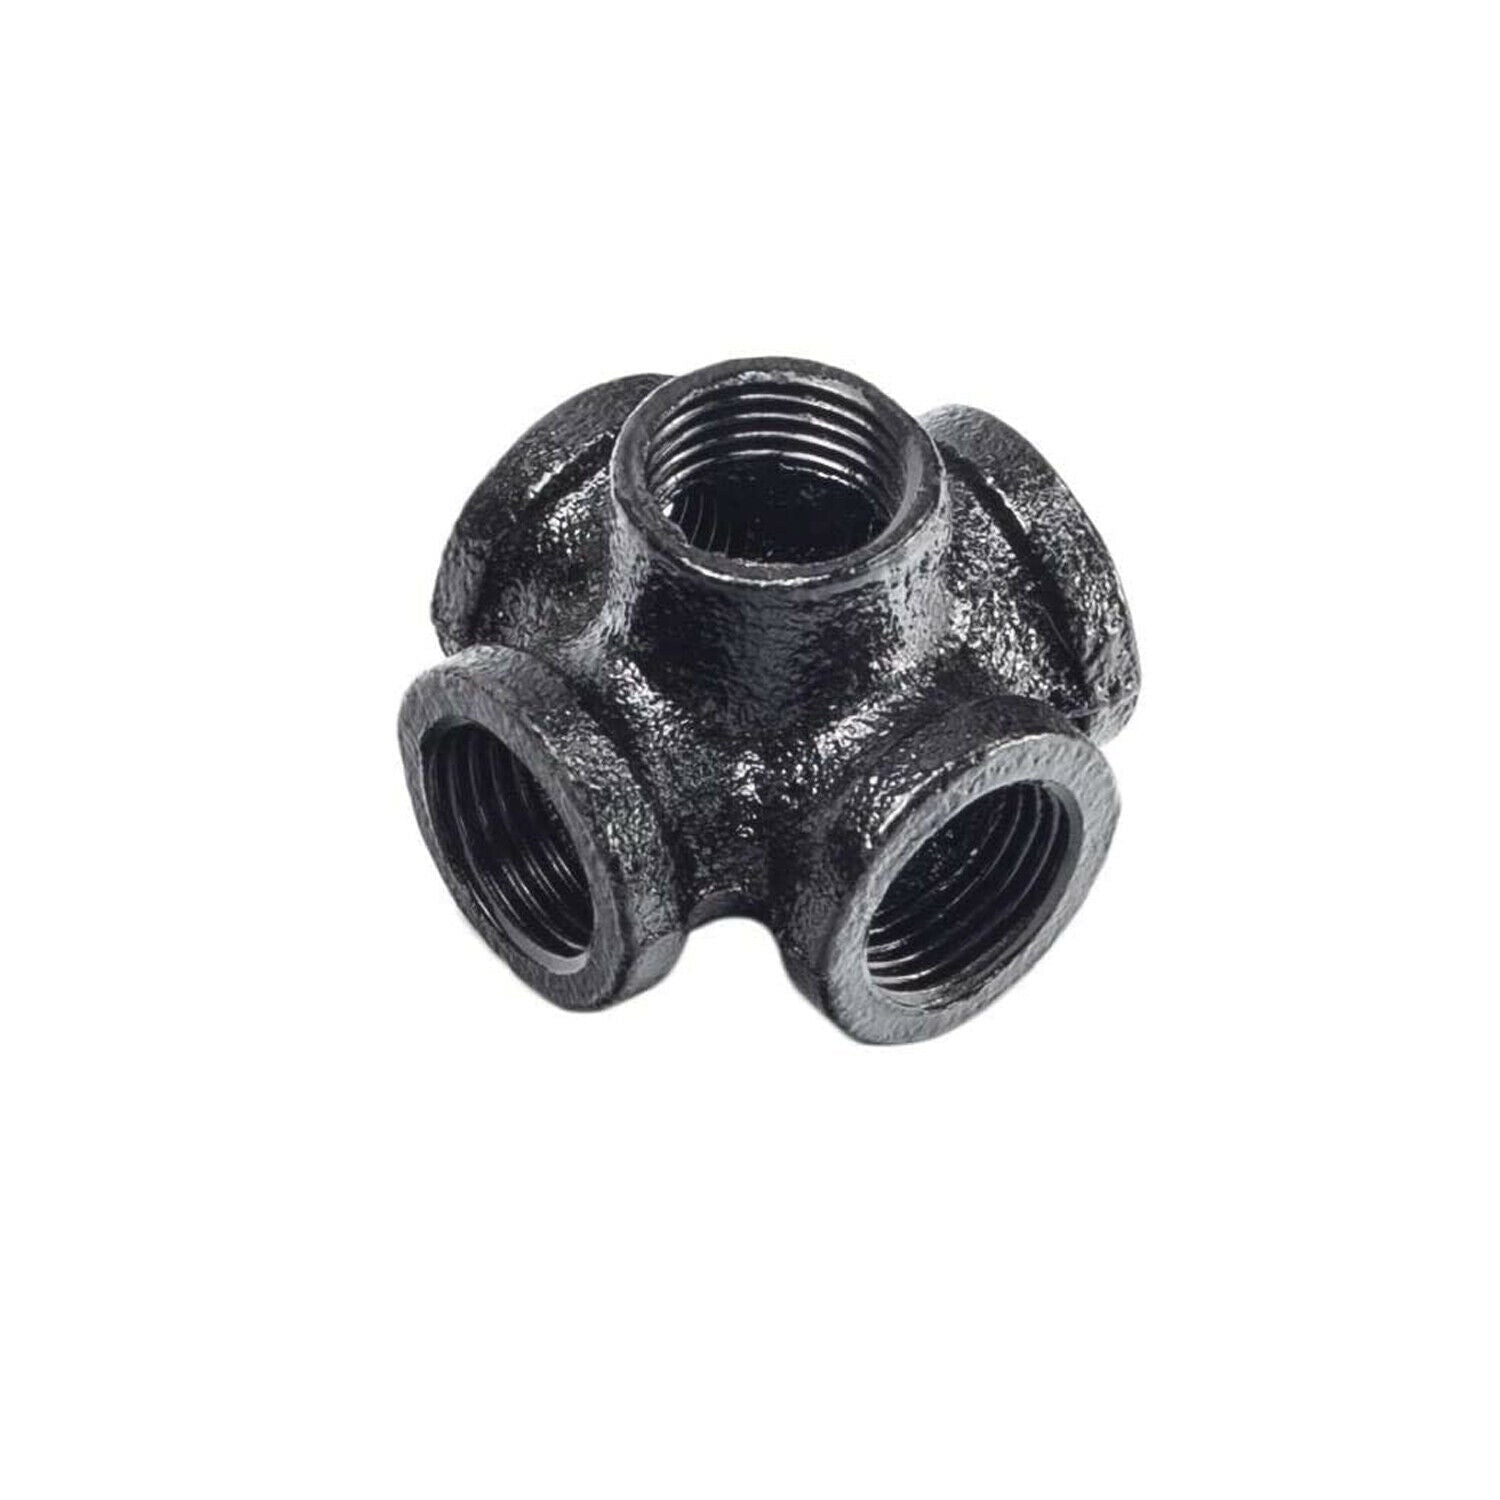 3/4 BSP steampunk lamp parts Iron pipe fitting